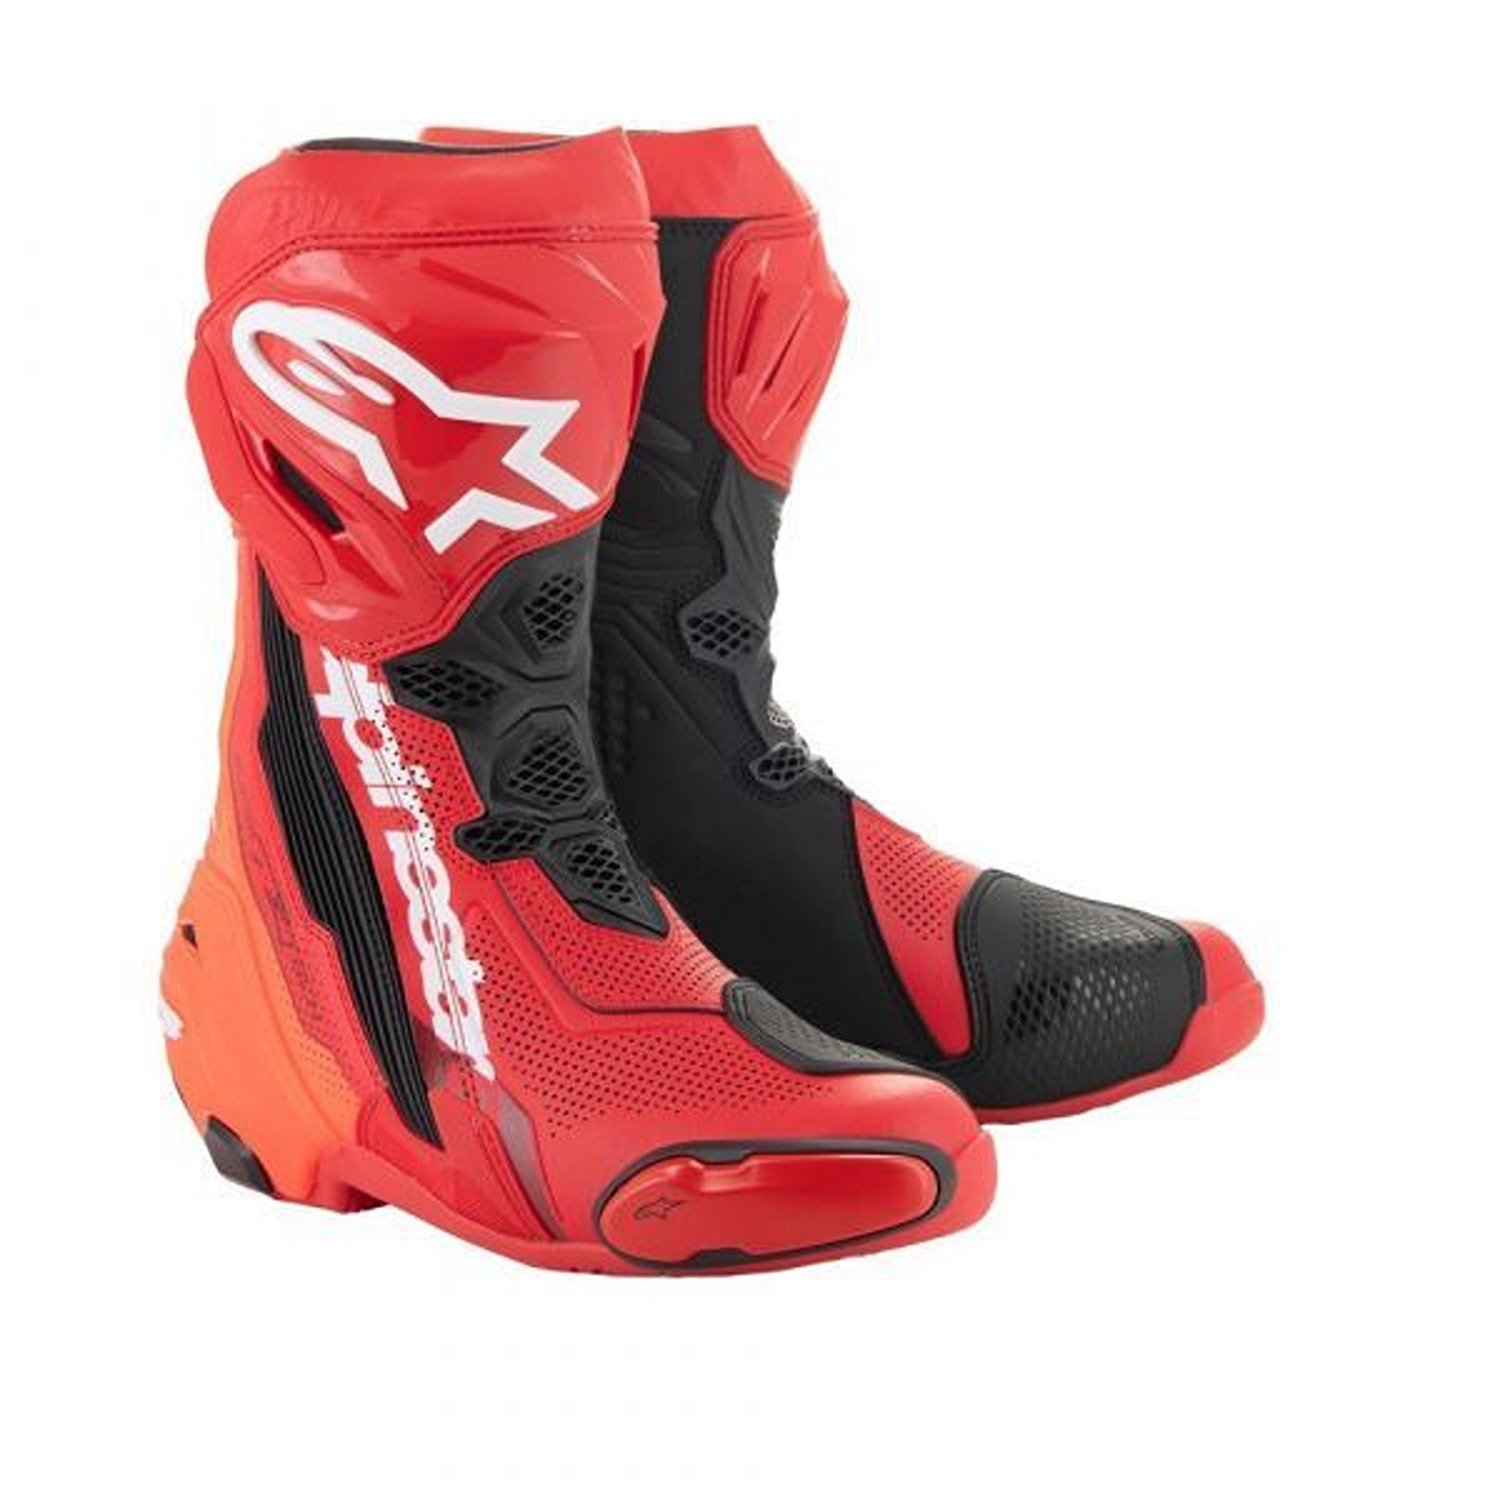 Image of Alpinestars Supertech R Vented Boots Bright Red Fluo Size 46 EN